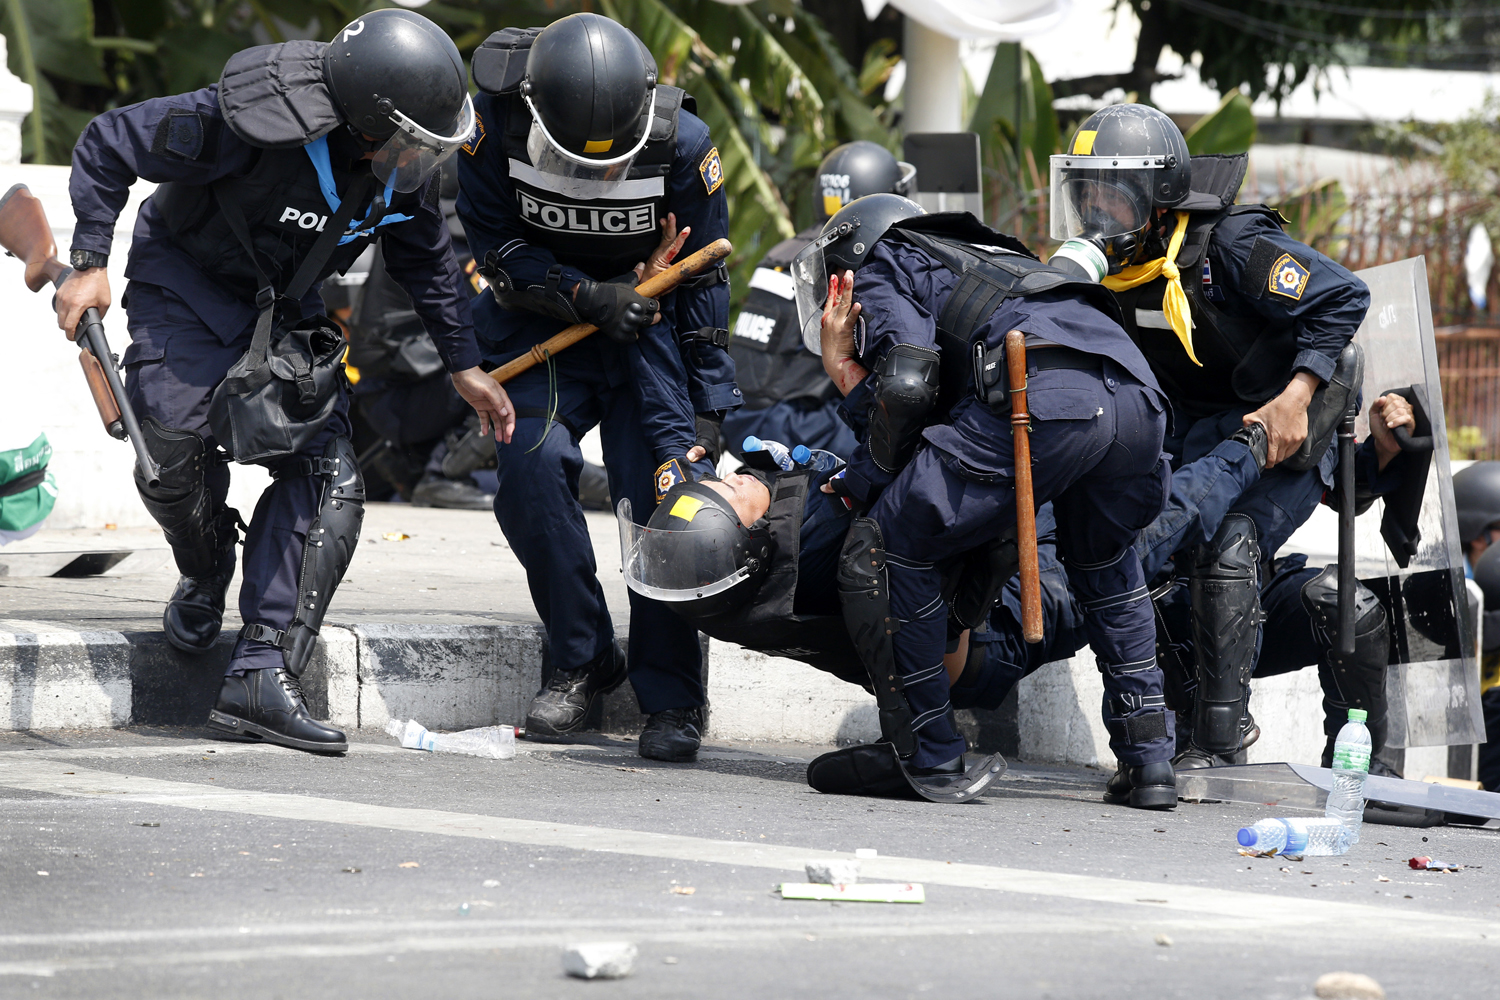 Thai police officers assist a colleague after an explosion during clashes with anti-government protesters near Government House in Bangkok Feb.18, 2014 (Athit Perawongmetha—Reuters)